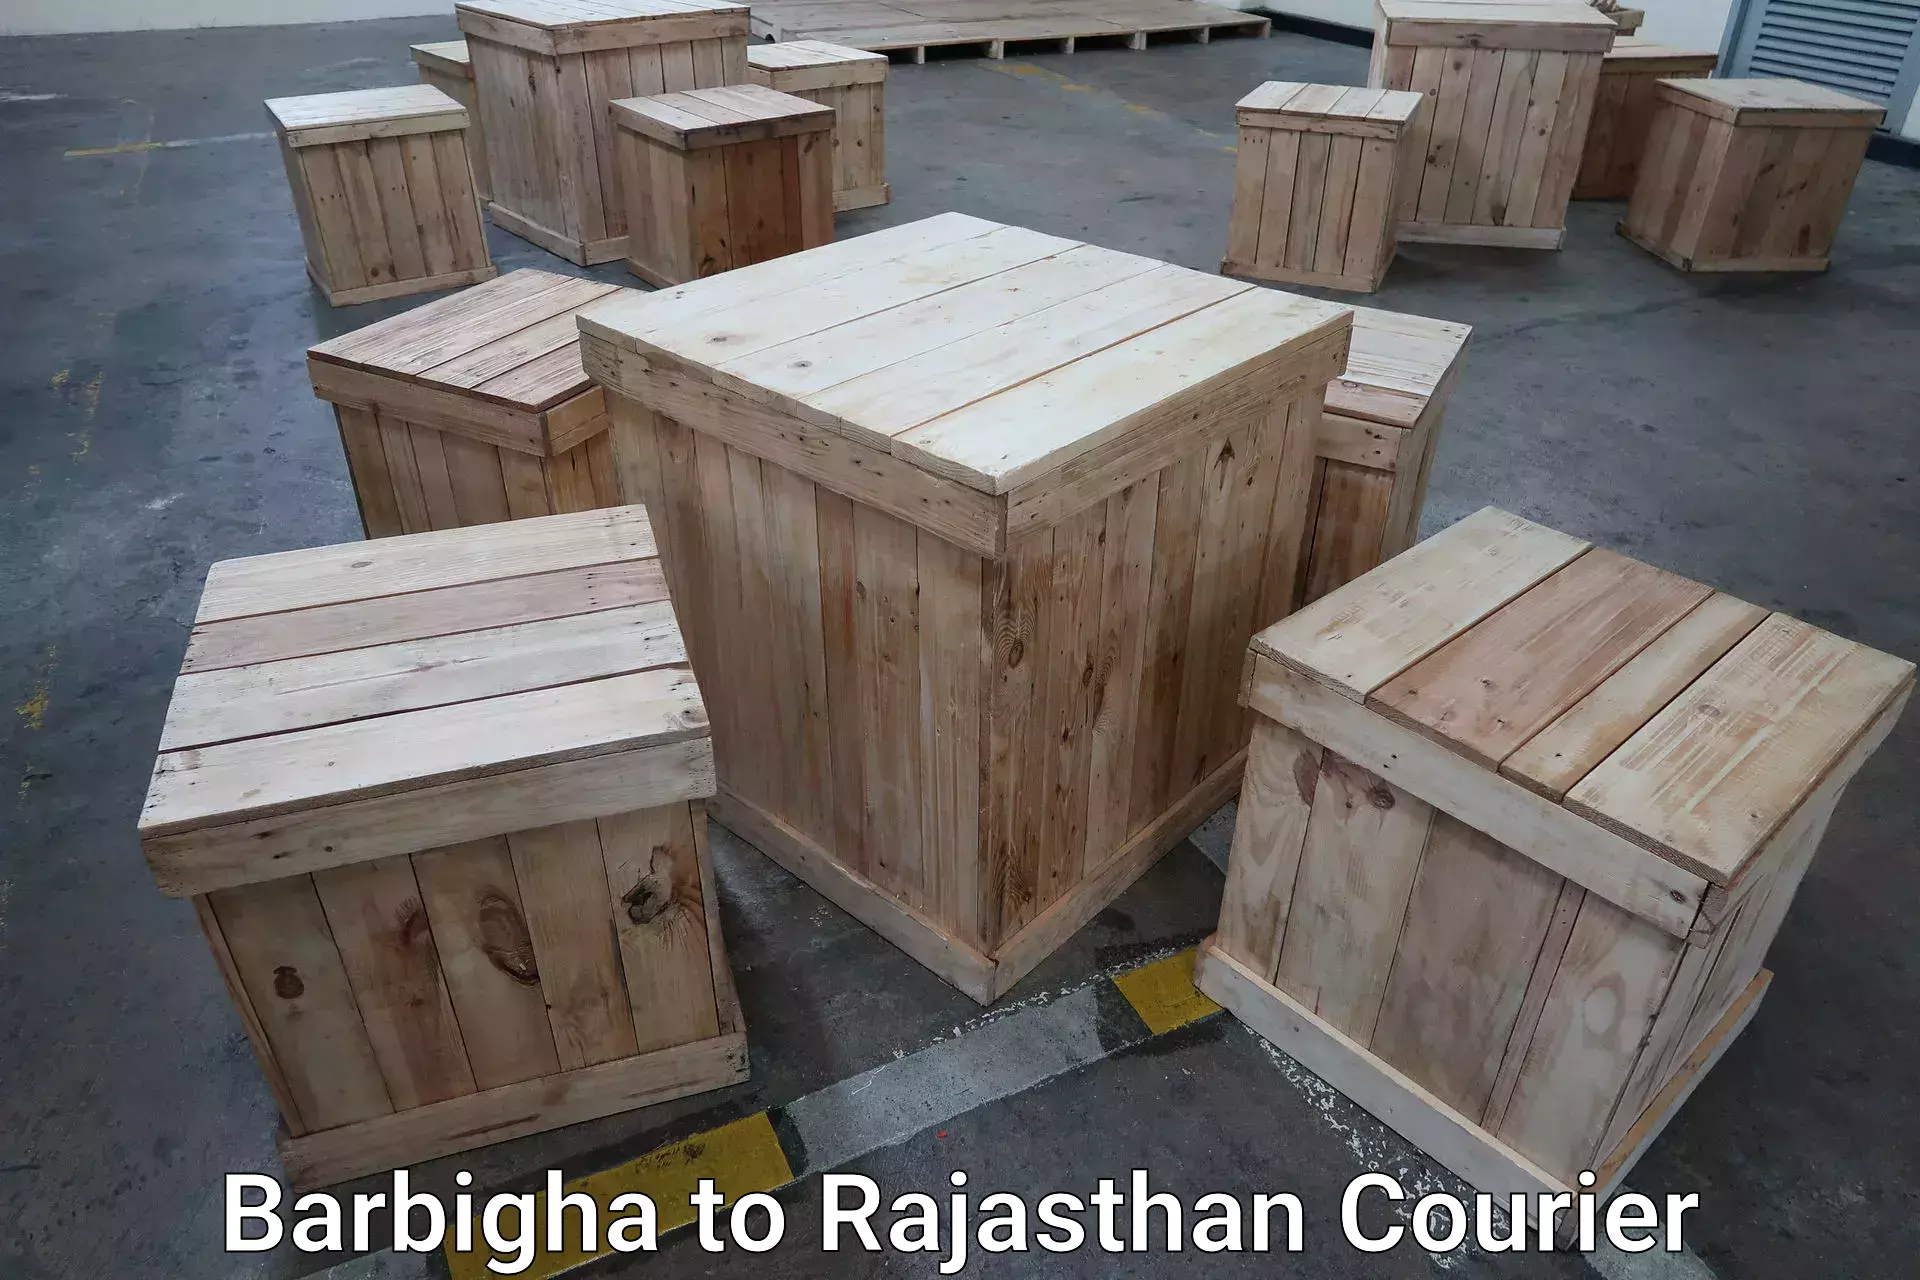 Luggage transport consulting Barbigha to Makrana